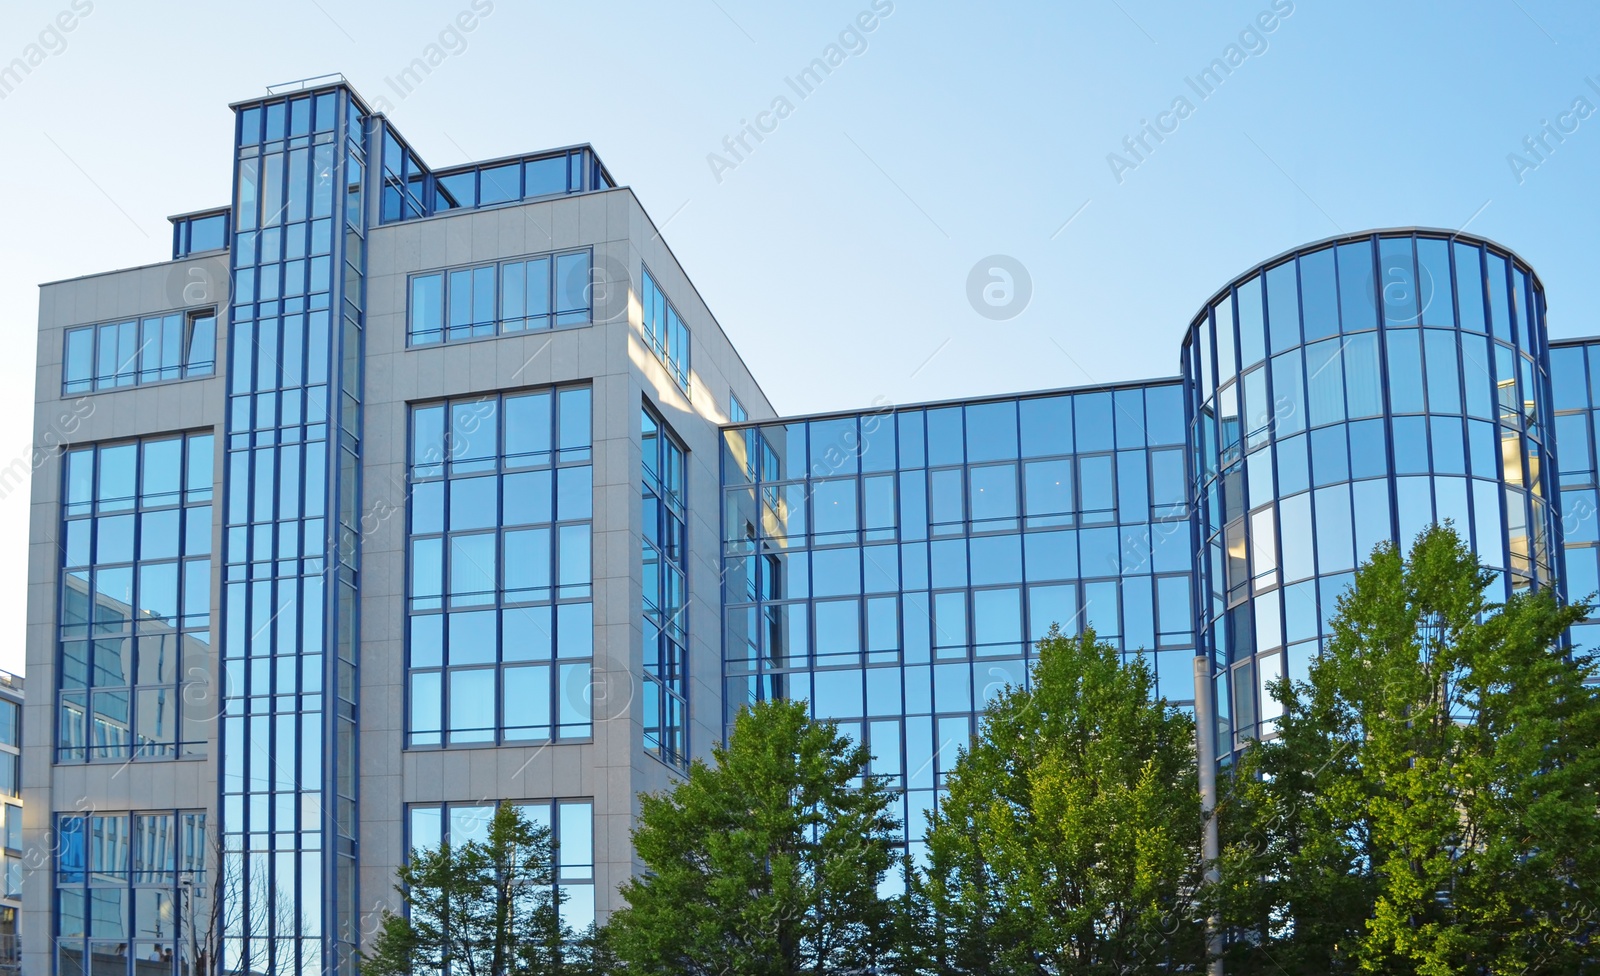 Photo of MUNICH, GERMANY - JUNE 23, 2018: Office building with many tinted windows on sunny day